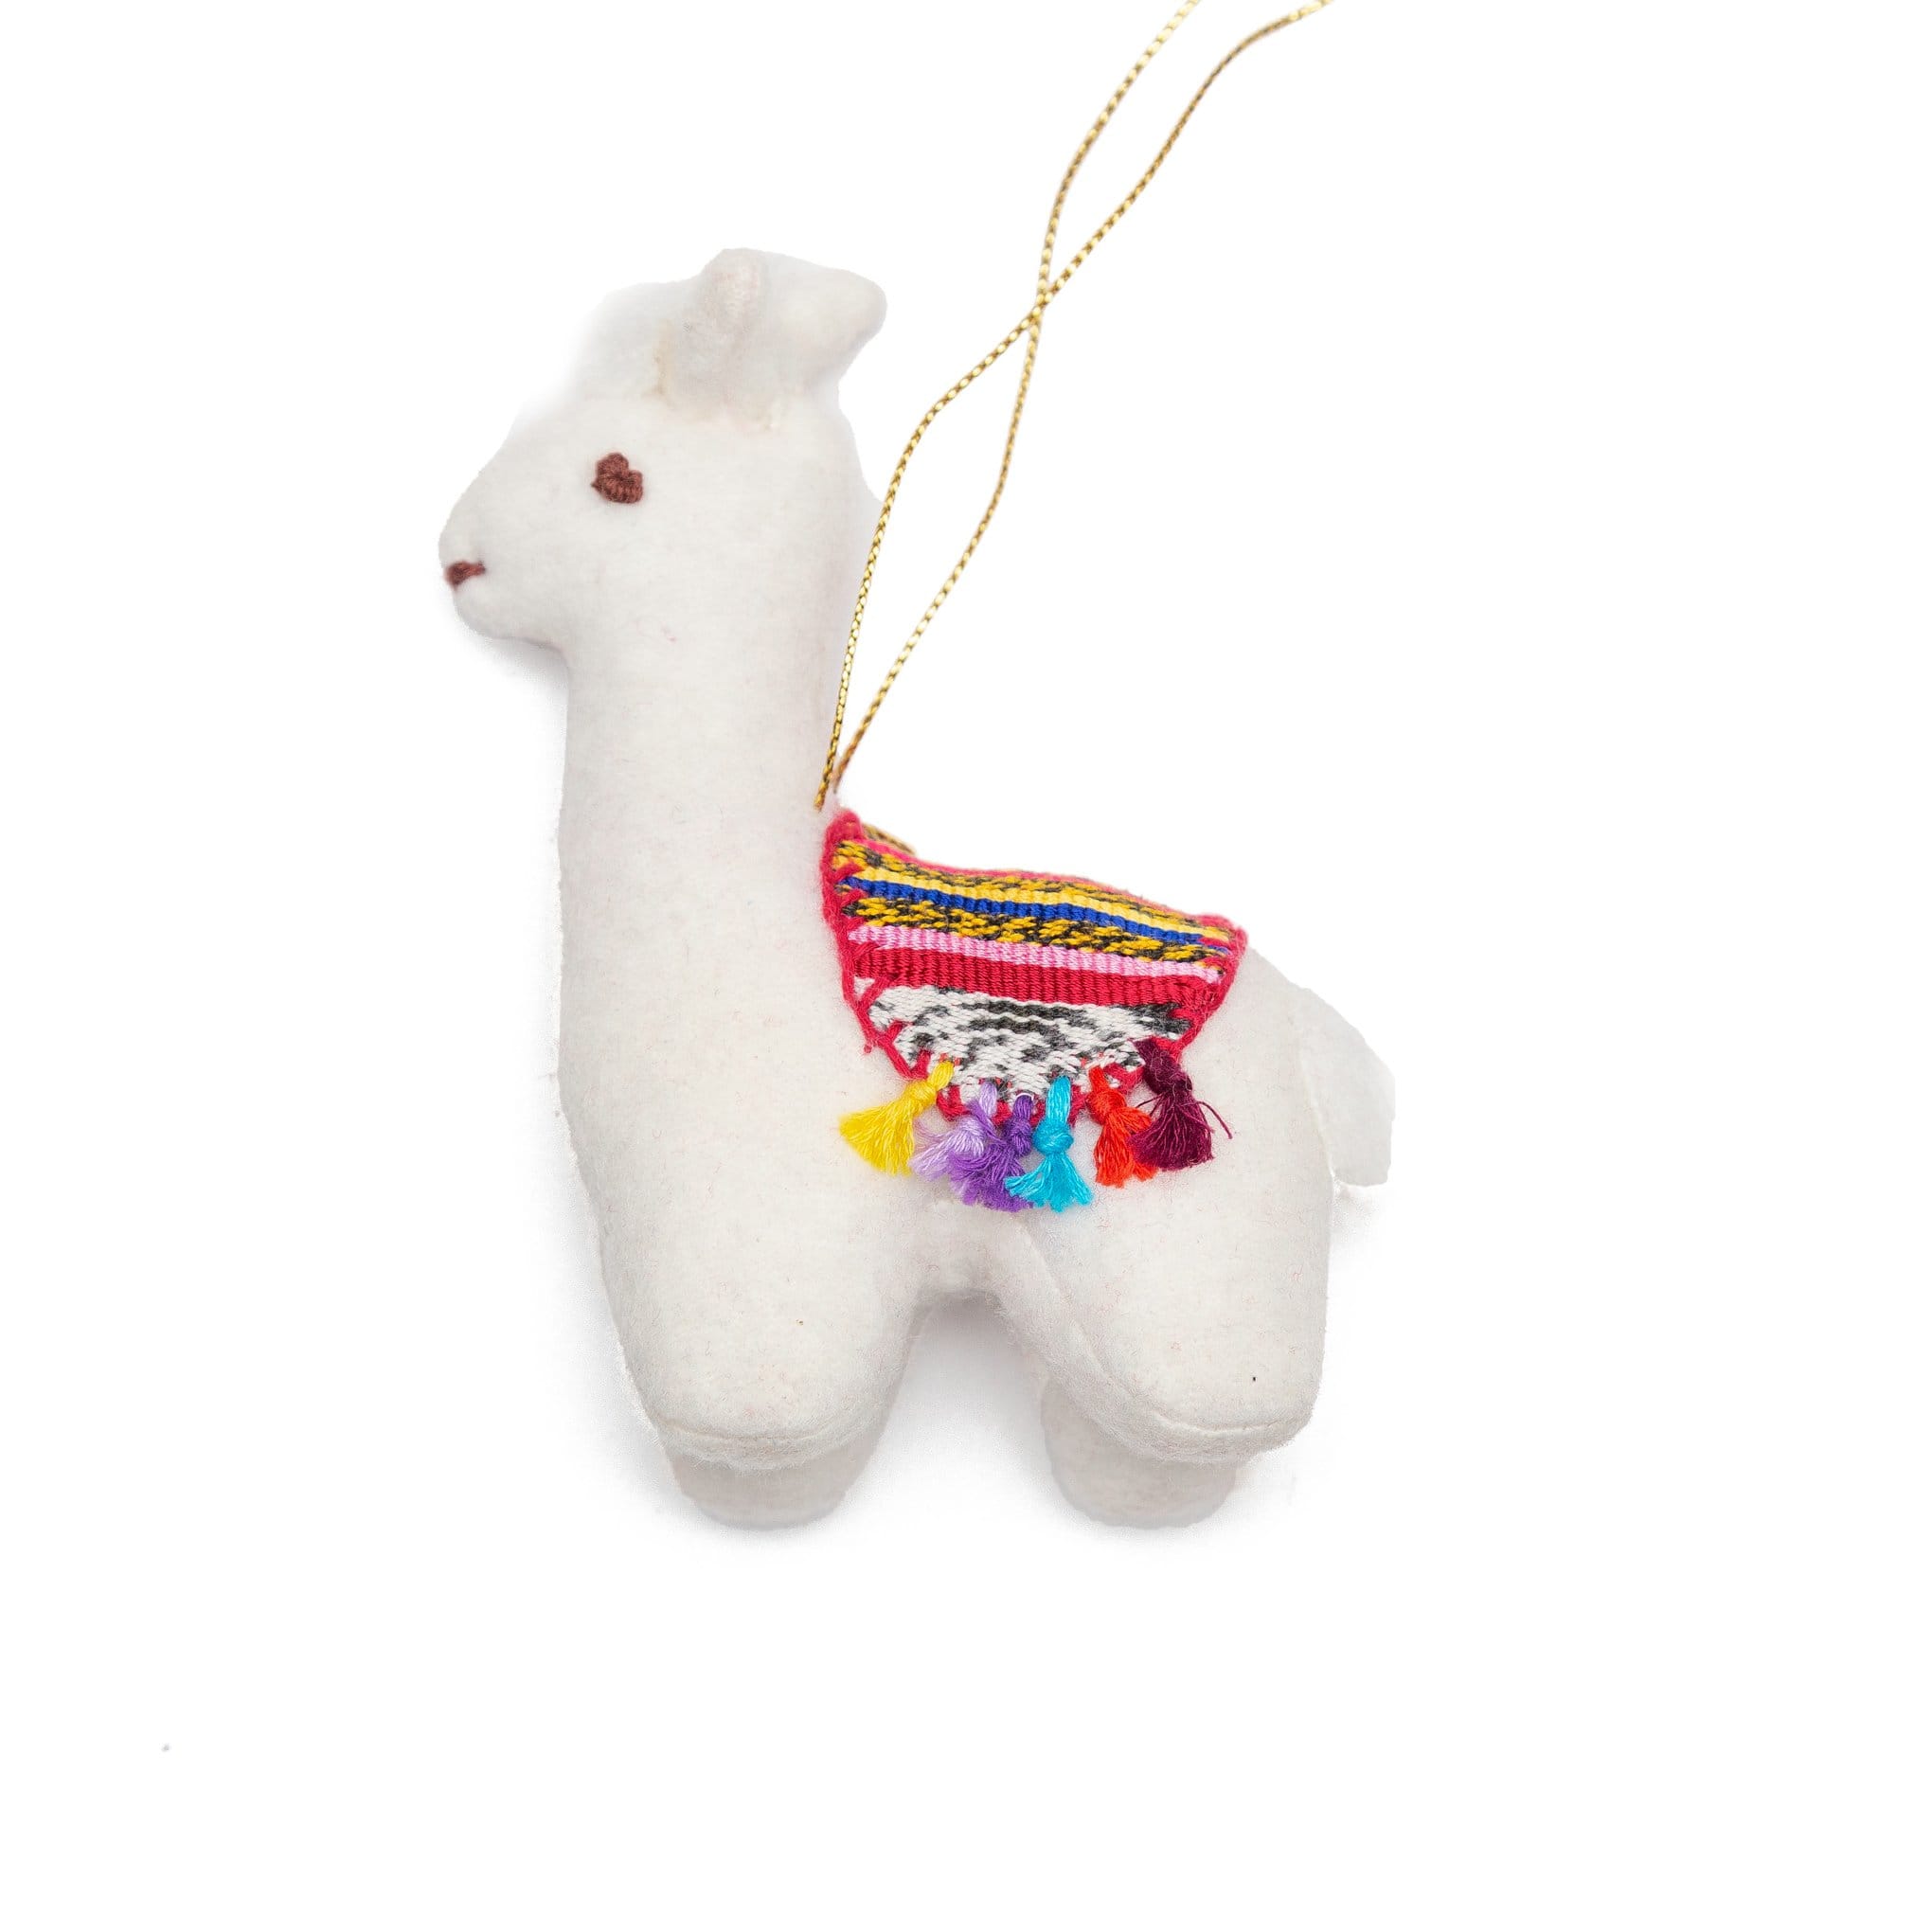 Whimsical Handcrafted Fair Trade Felt Llama Ornament: A Touch of Andean Charm for Your Home**